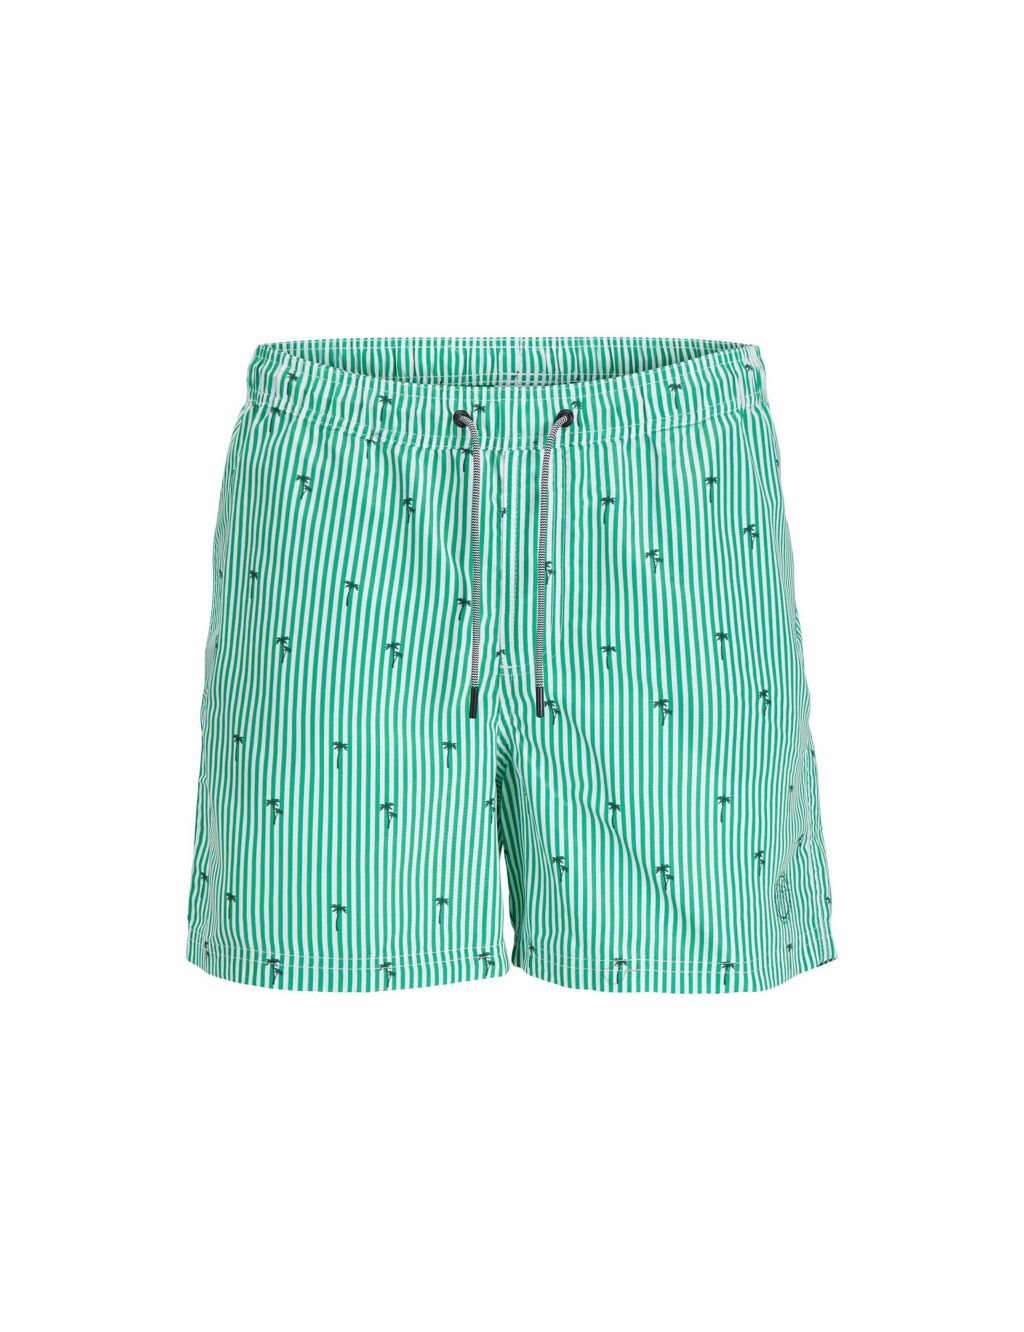 Striped Embroidered Swim Shorts